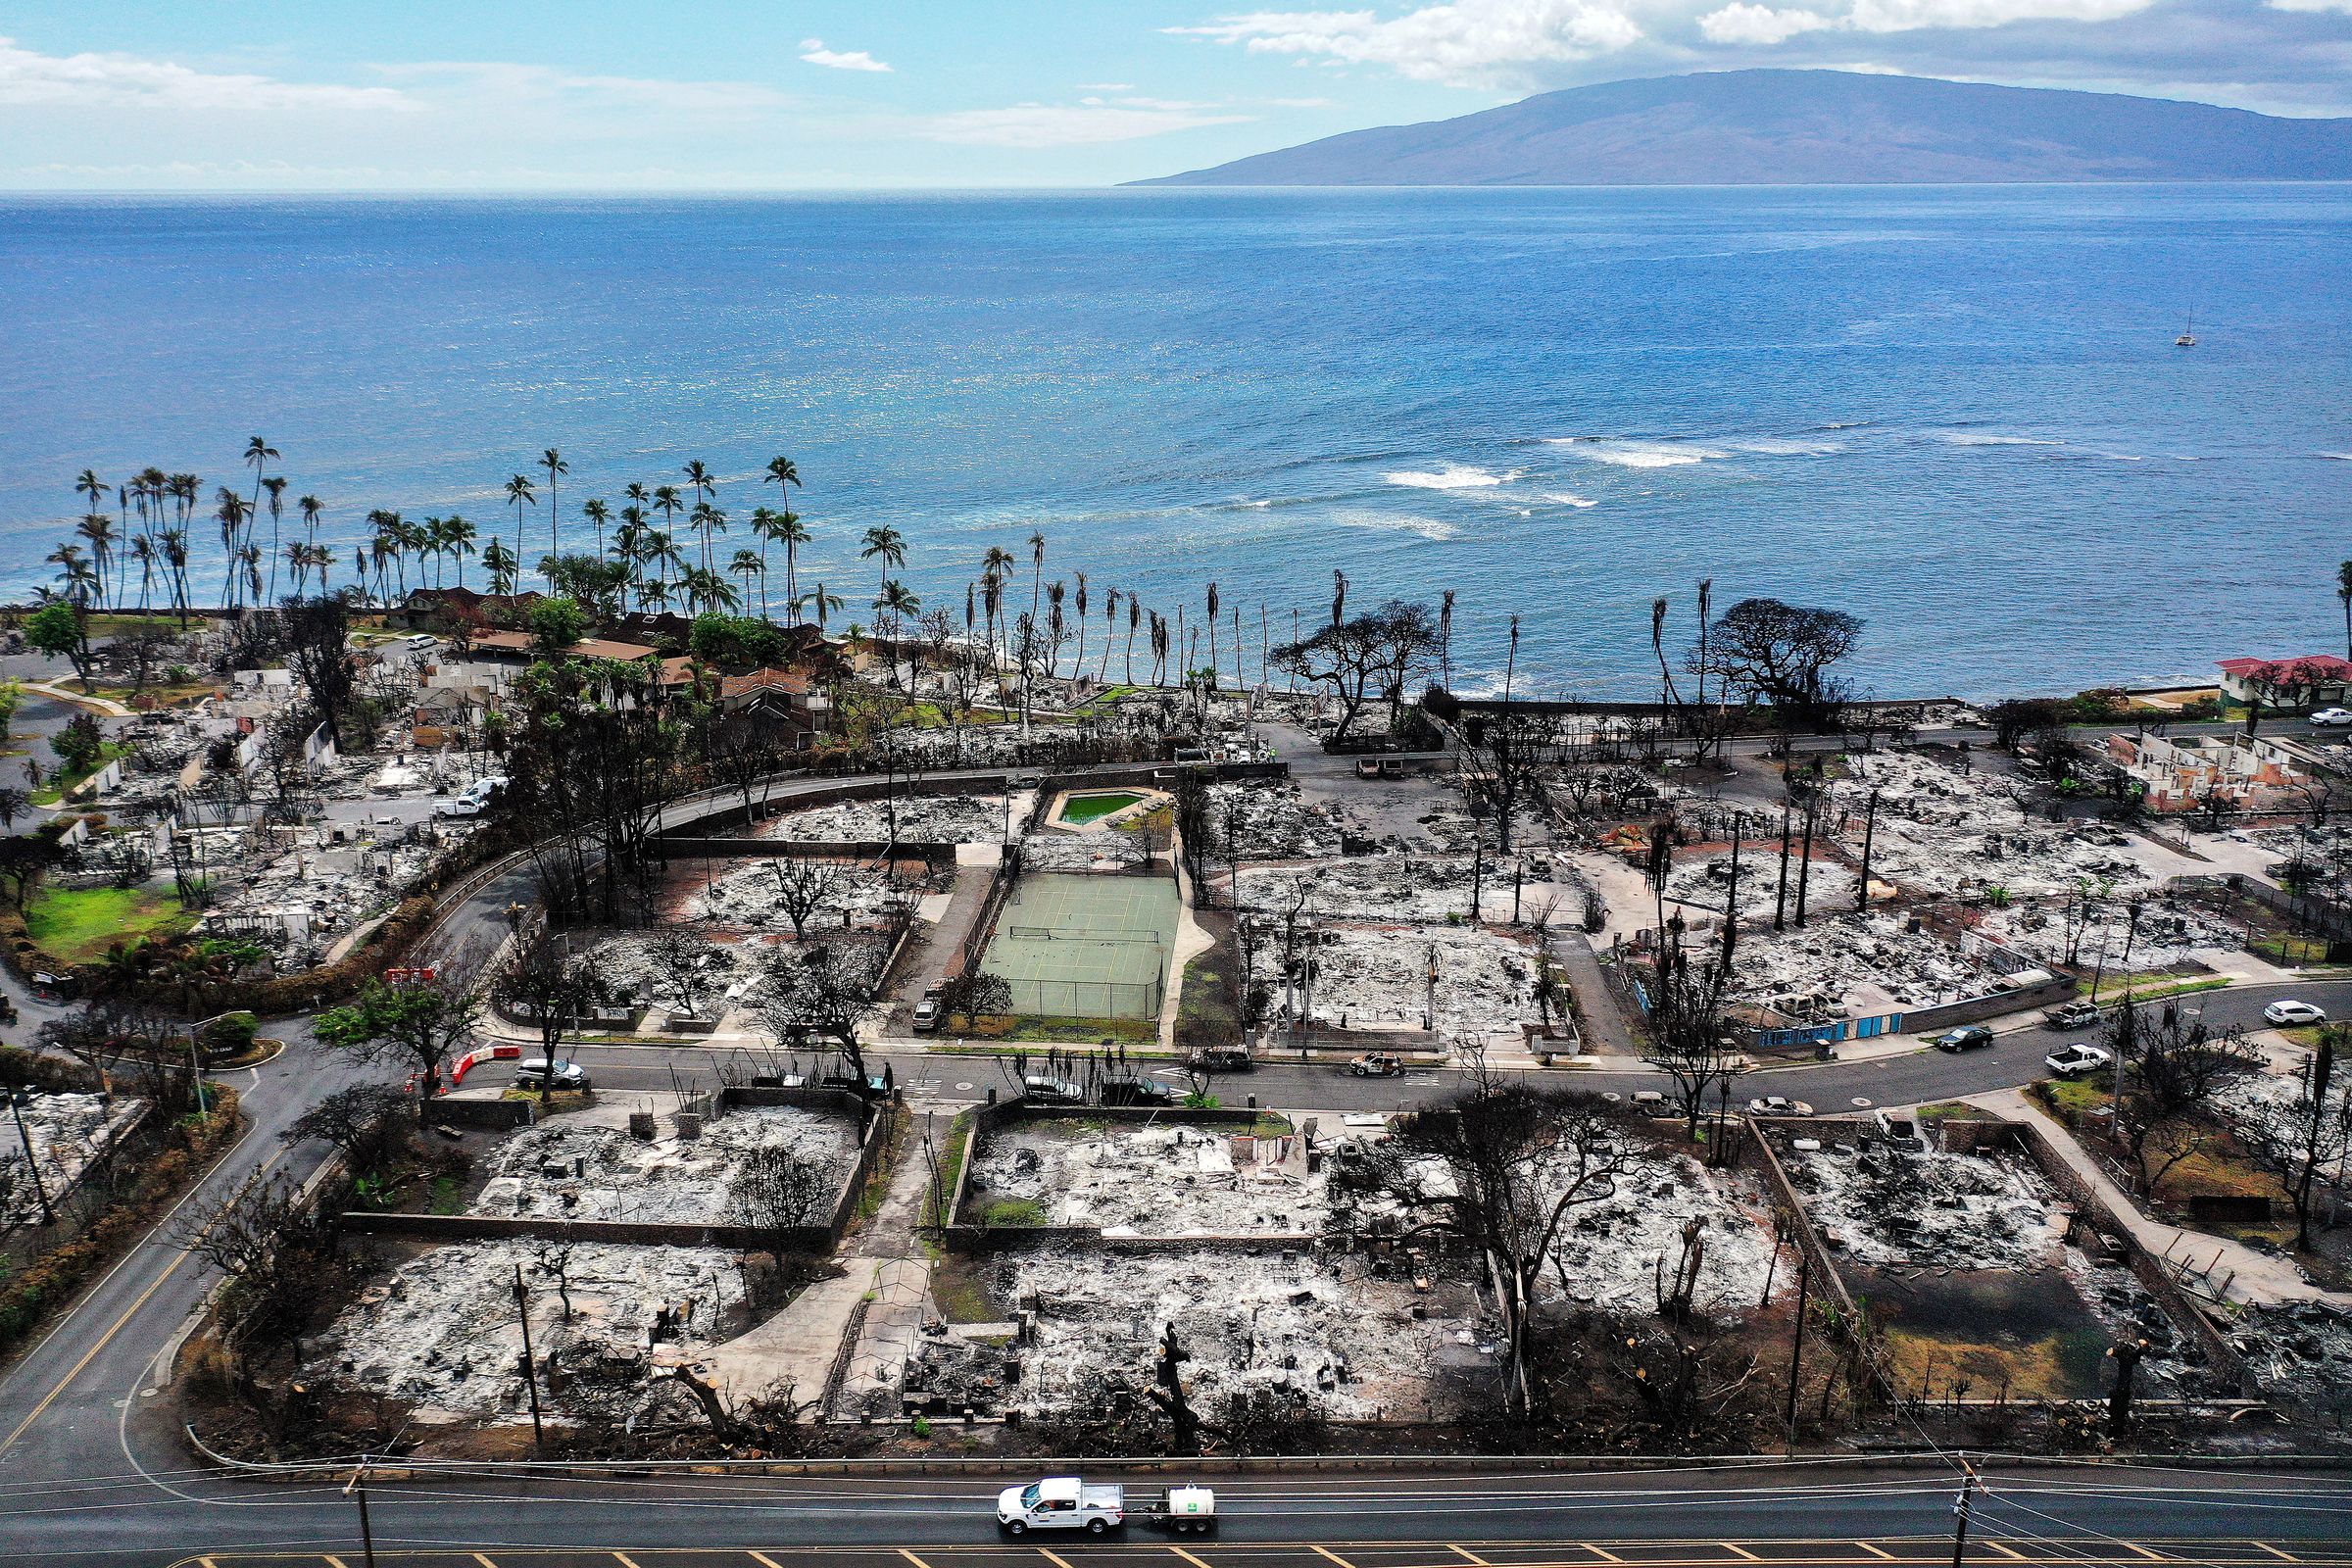 In an aerial view, a recovery vehicle drives past burned structures and cars in a neighborhood next to shoreline.